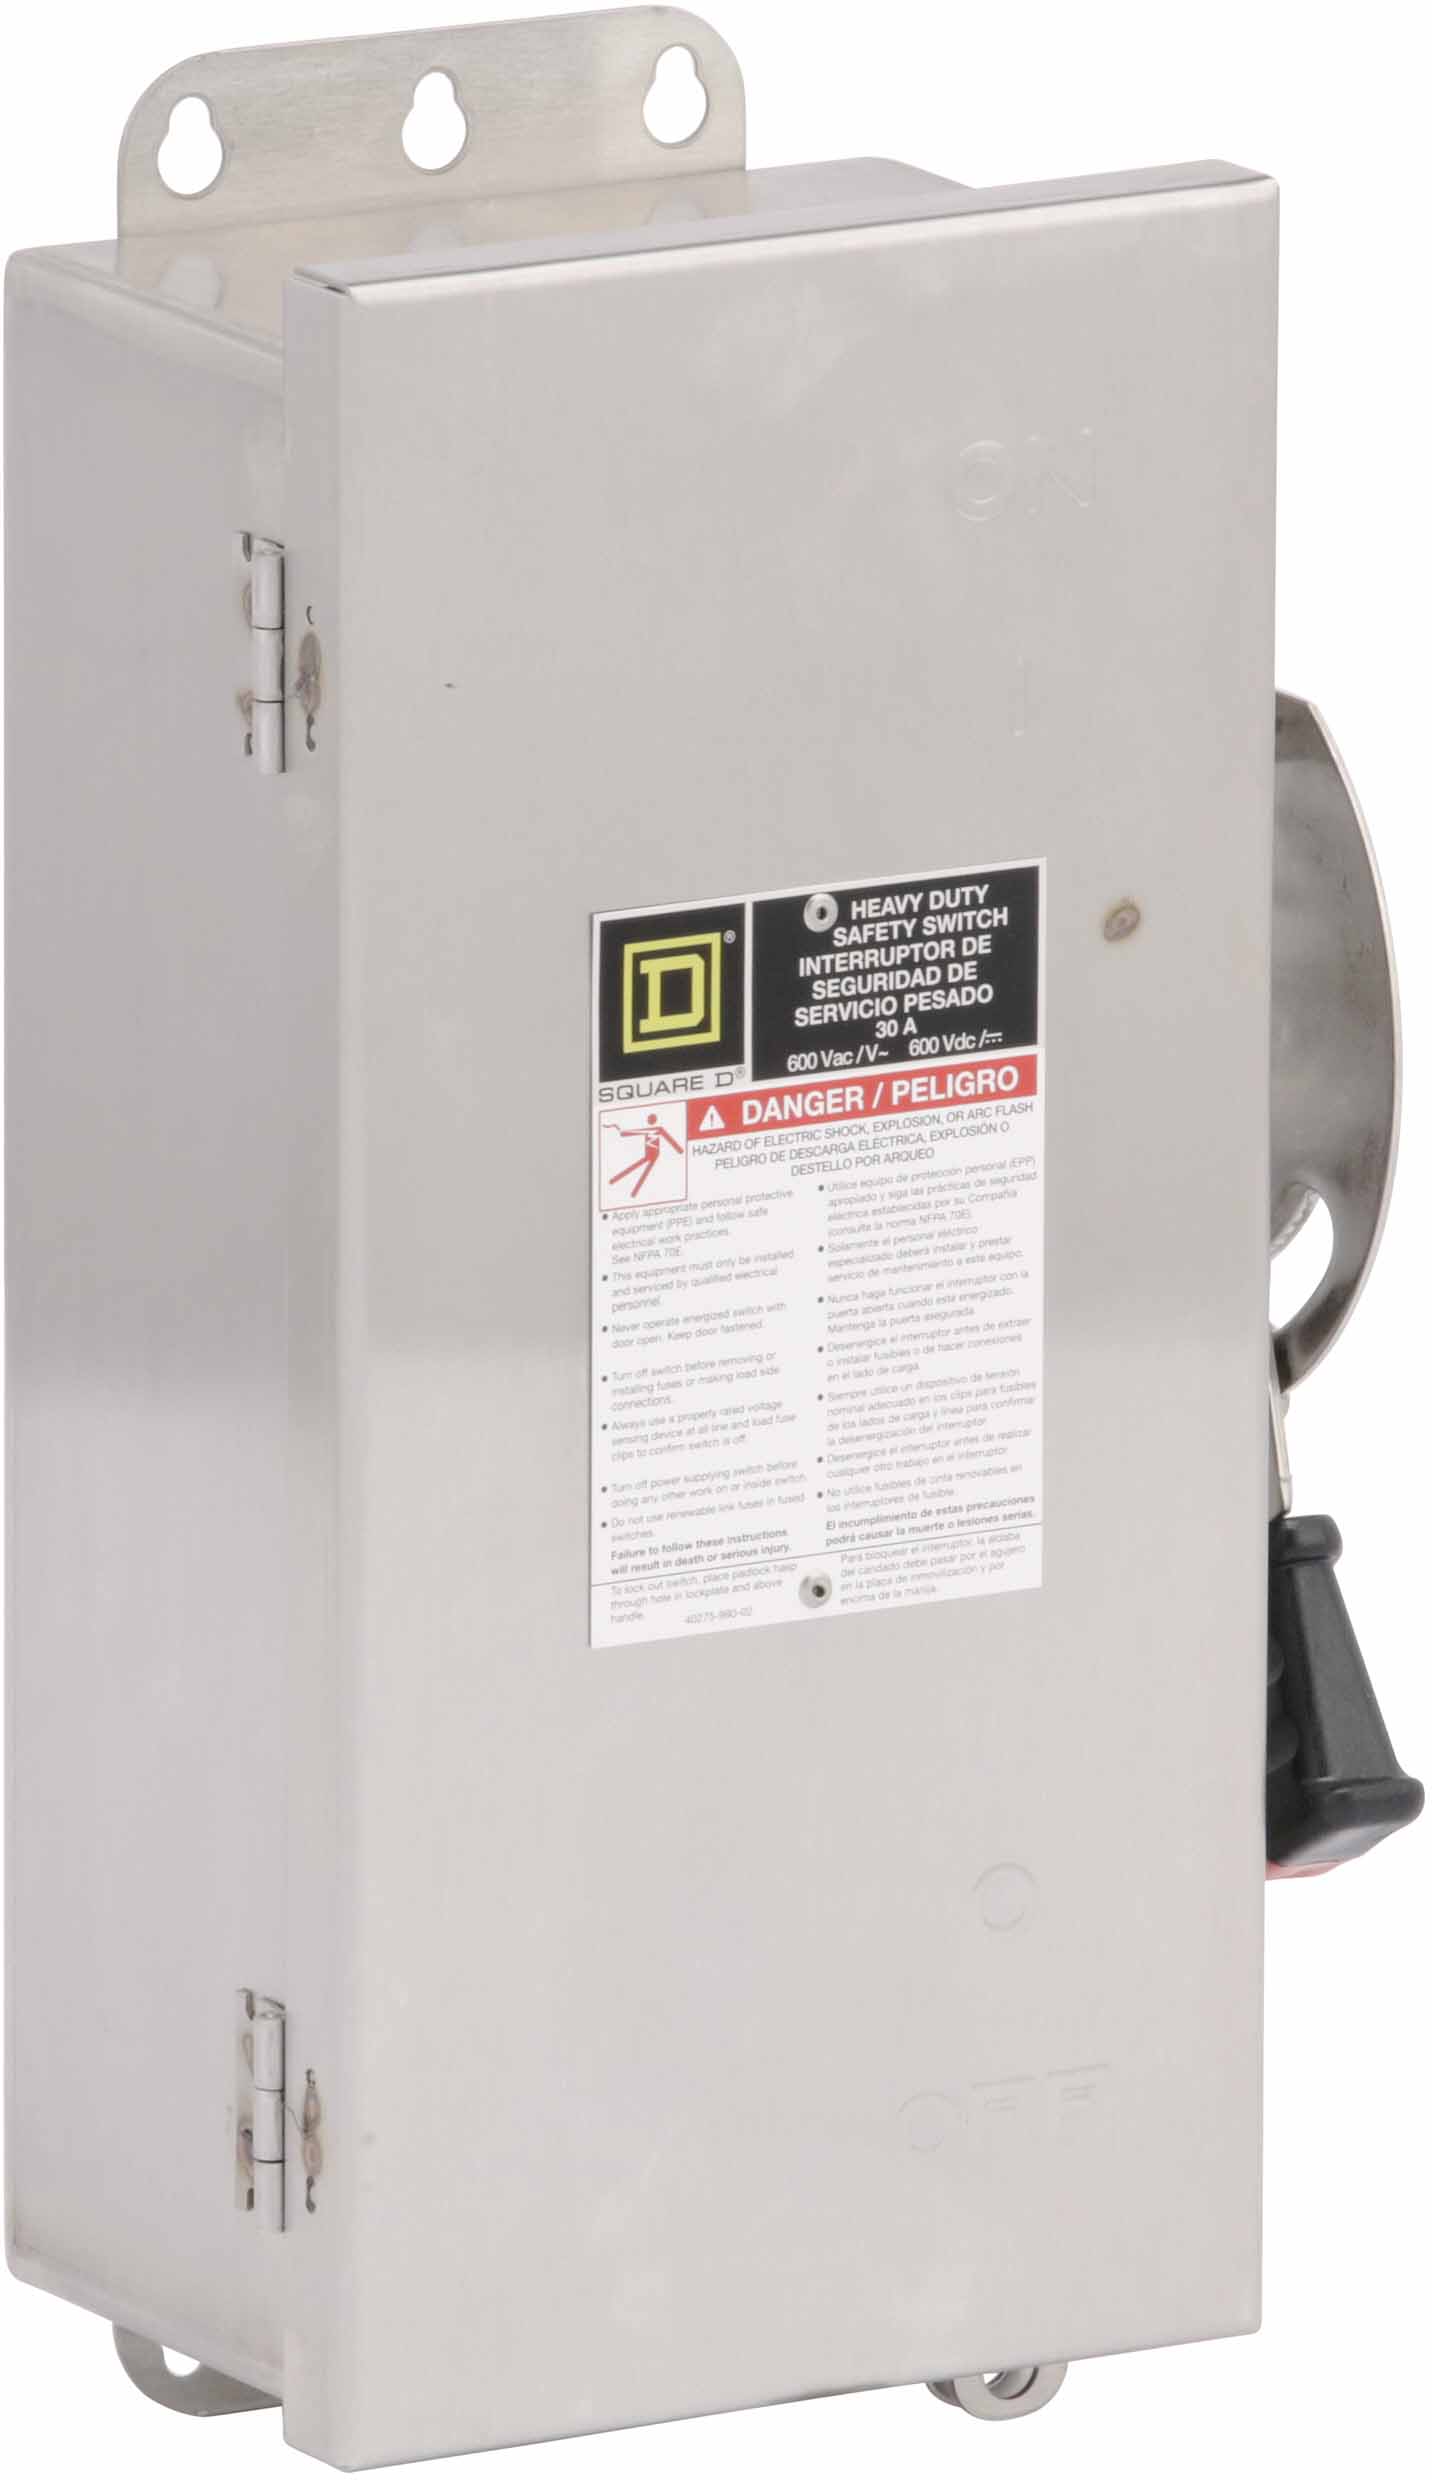 HU361DS - Square D - Disconnect and Safety Switch